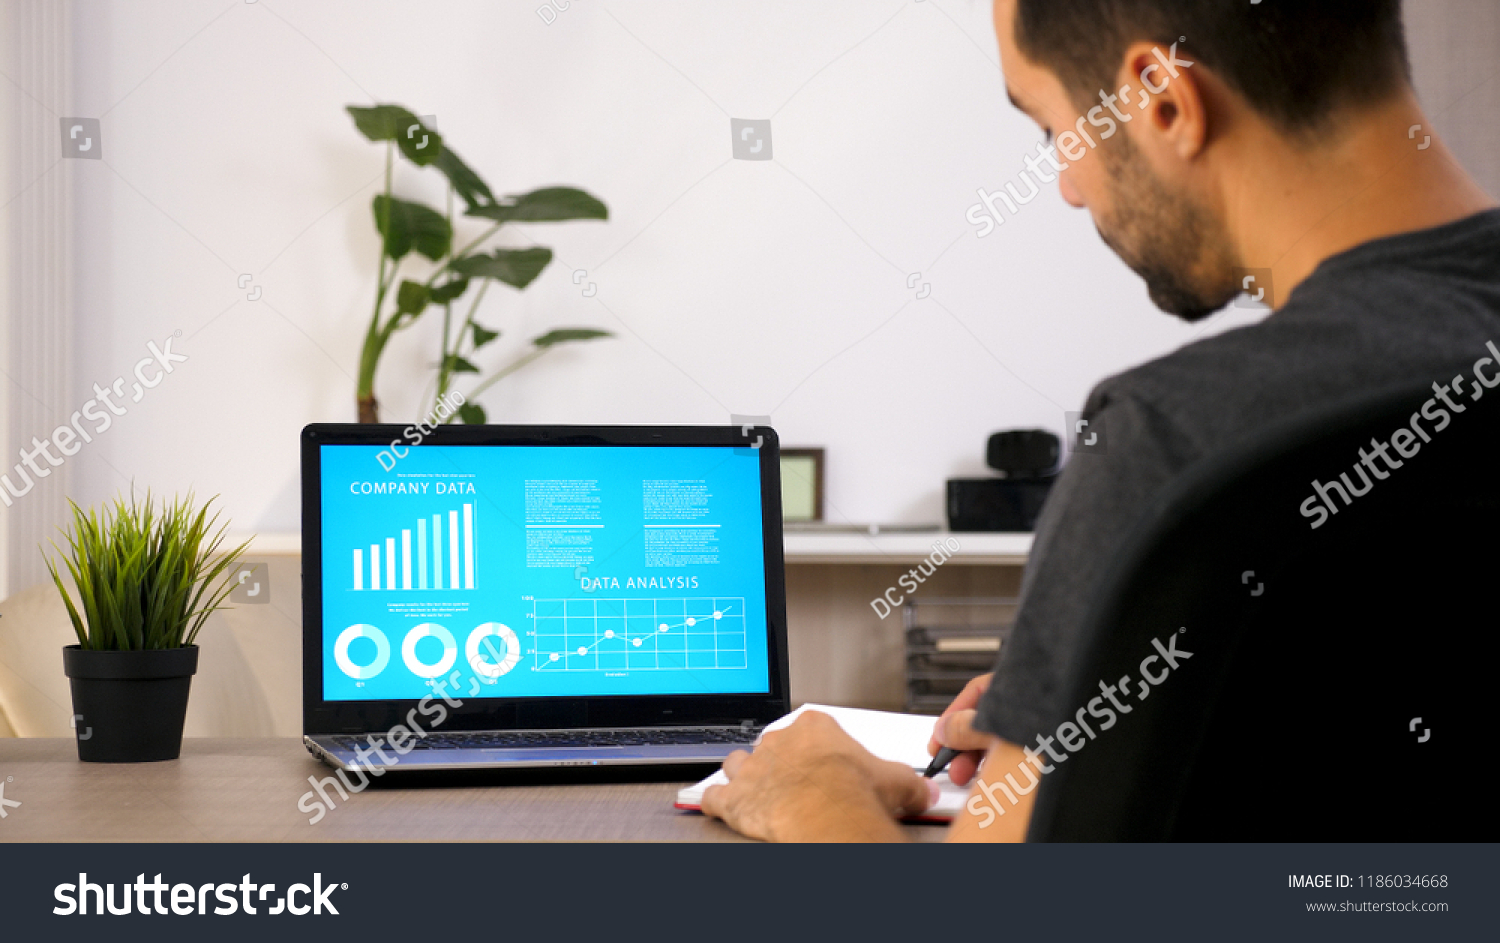 Business person working on his laptop looking at chart data in his living room #1186034668